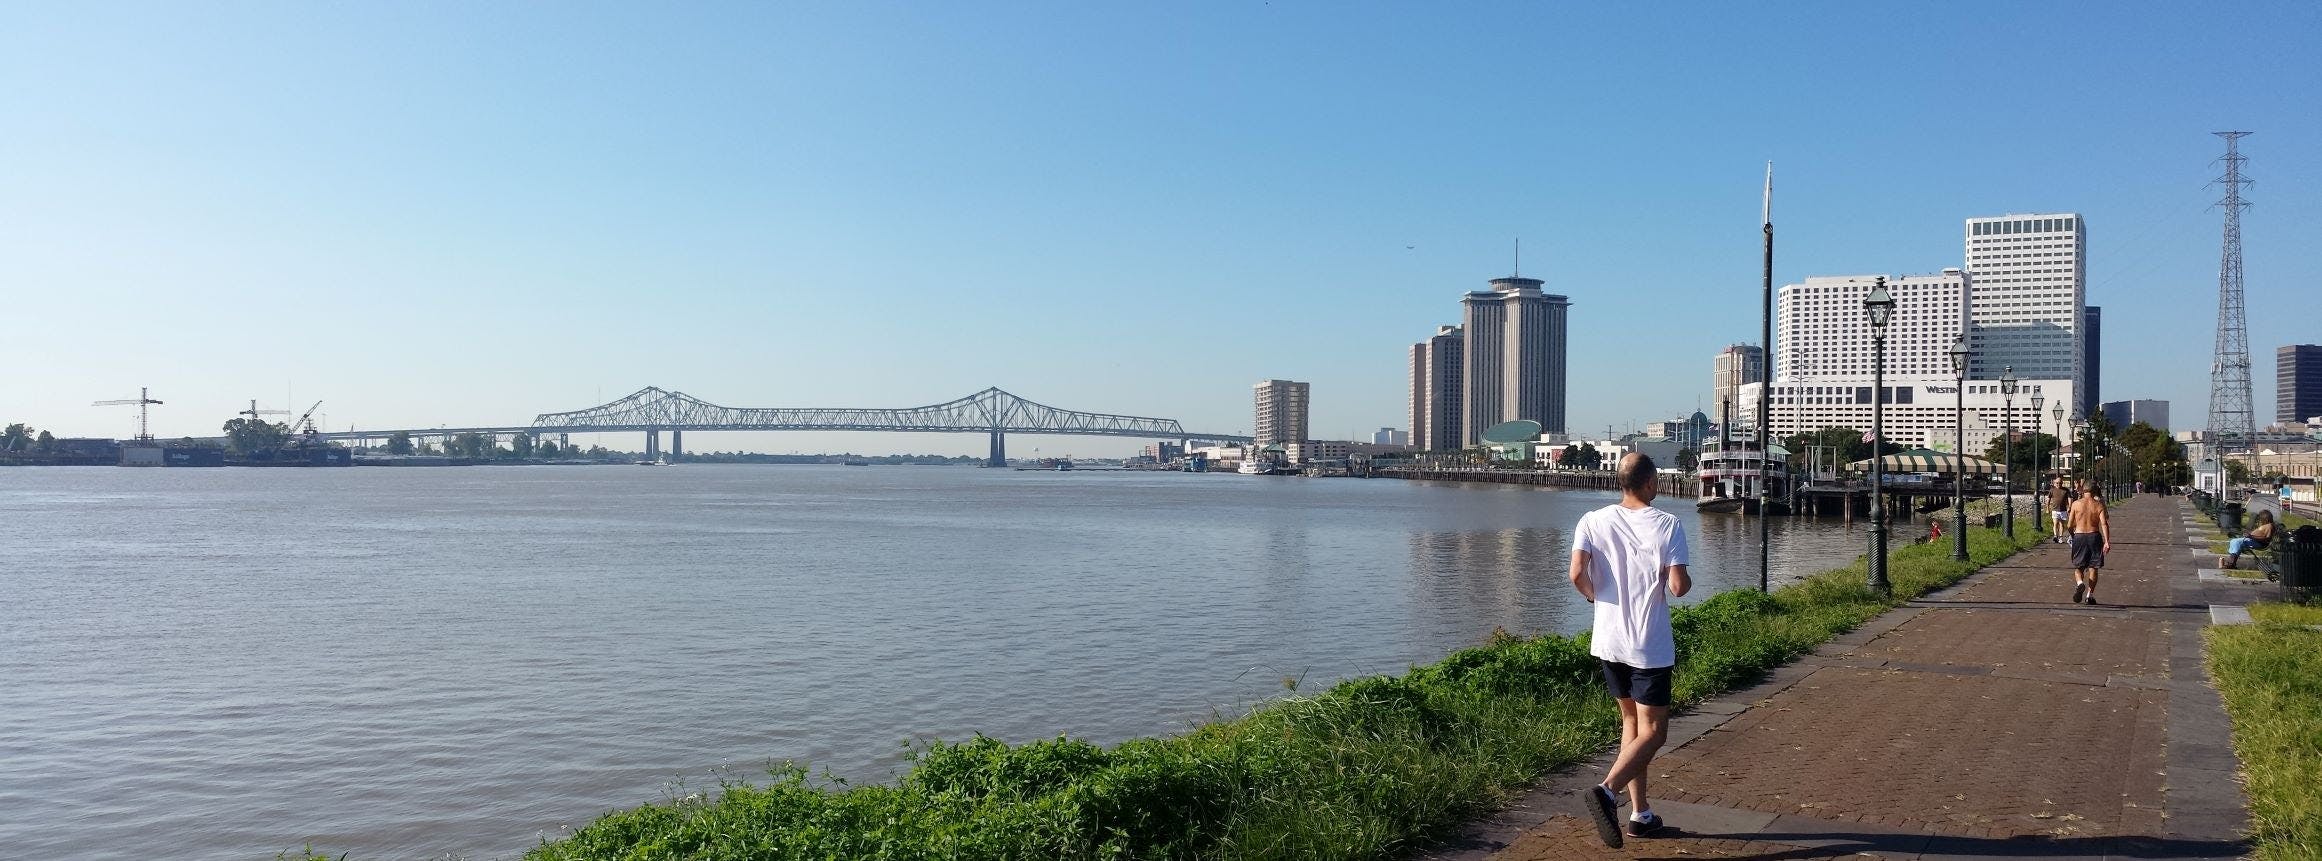 The New Orleans skyline seen from Crescent Park